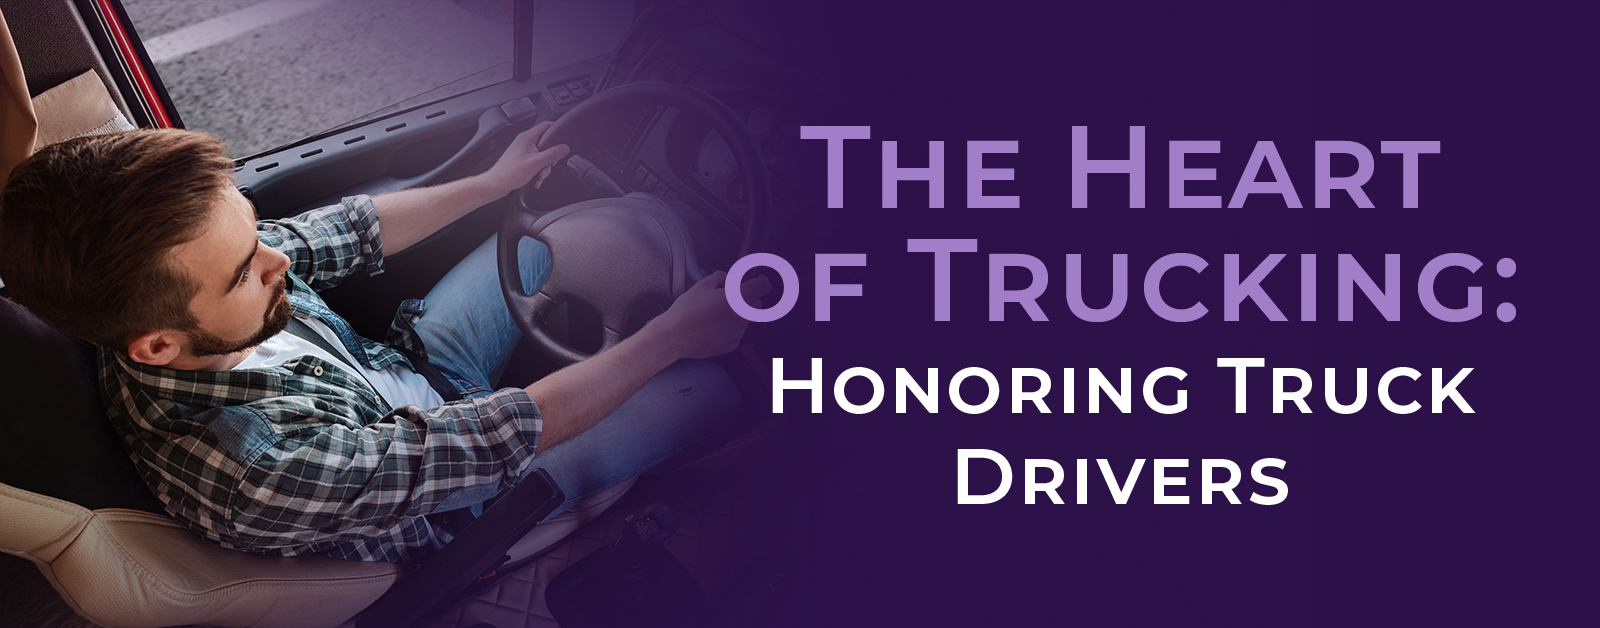 The Heart of Trucking: Honoring Truck Drivers